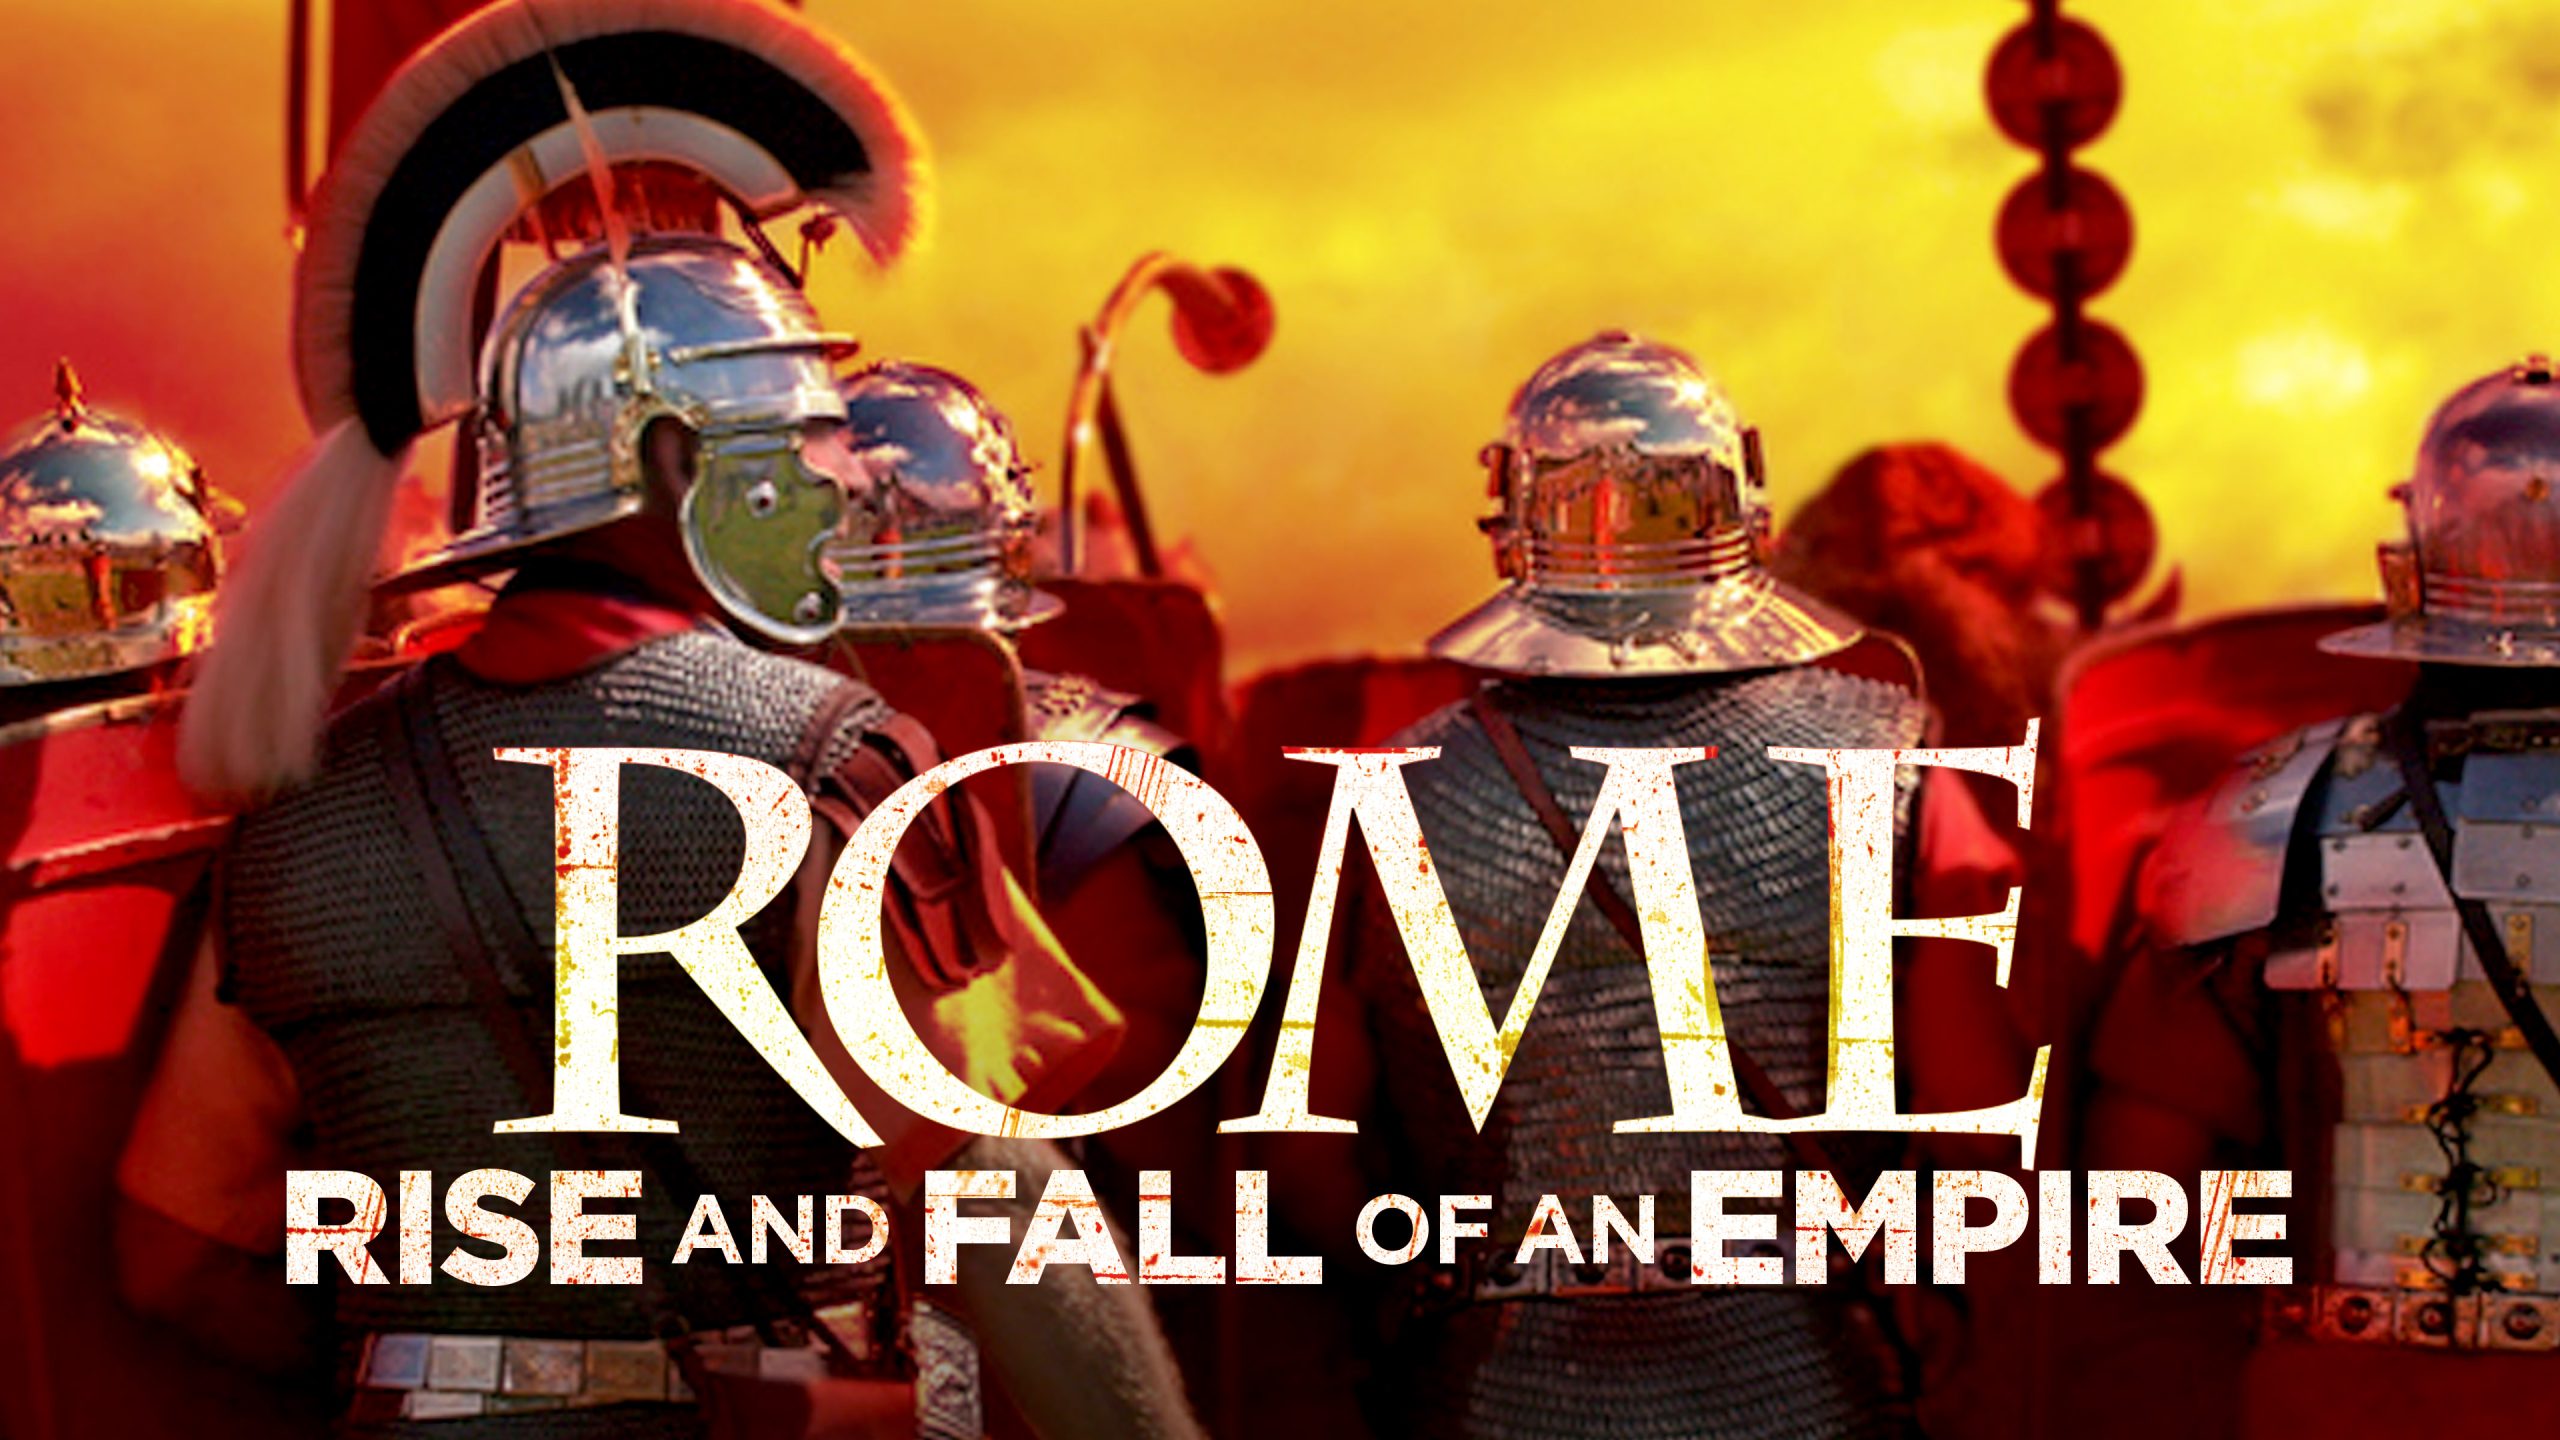 Ancient Rome: The Rise and Fall of an Empire episode 6